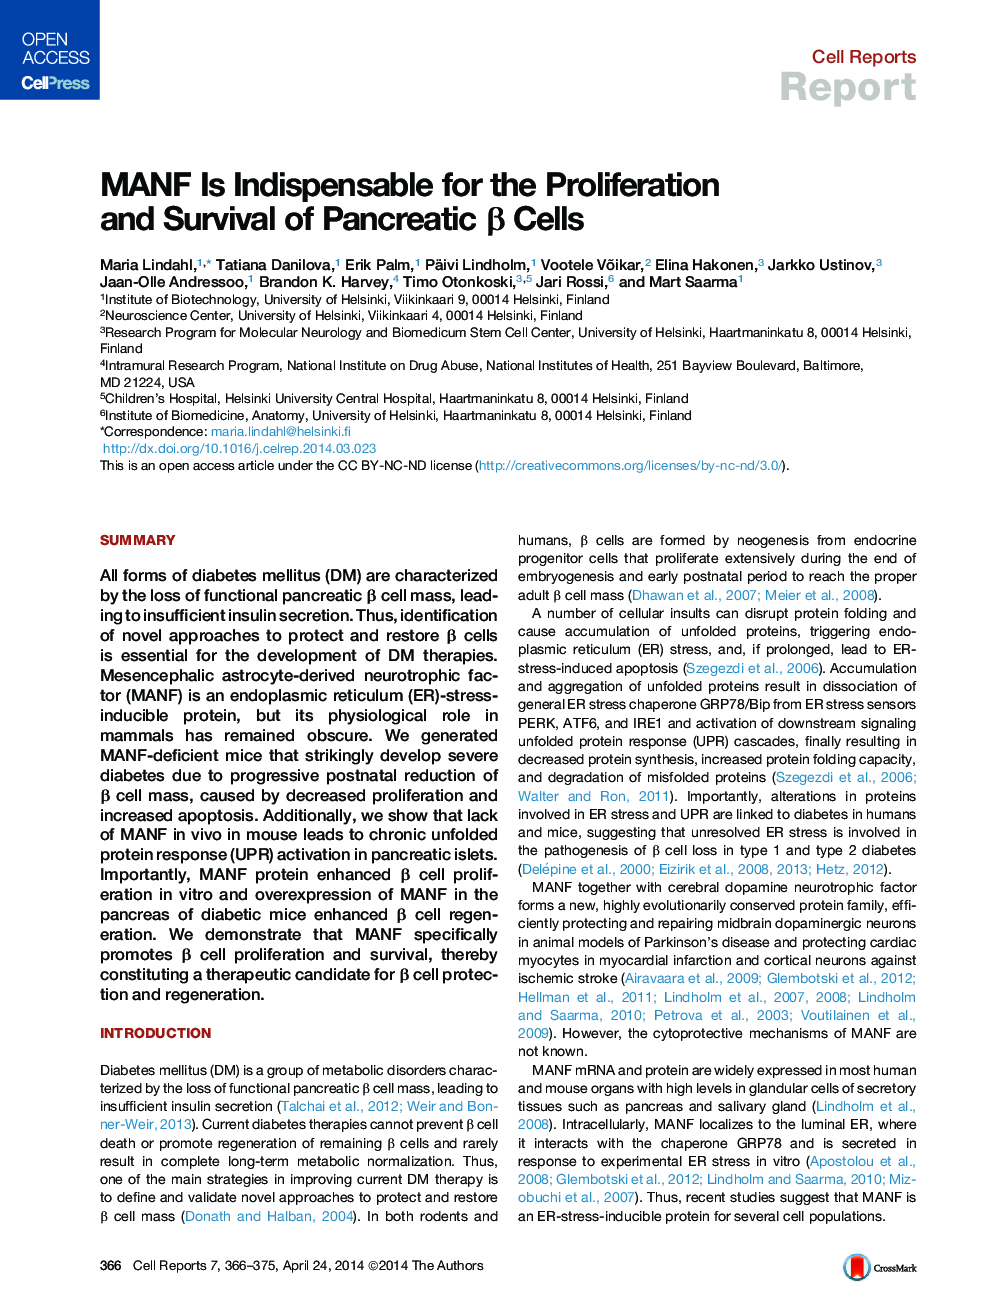 MANF Is Indispensable for the Proliferation and Survival of Pancreatic β Cells 